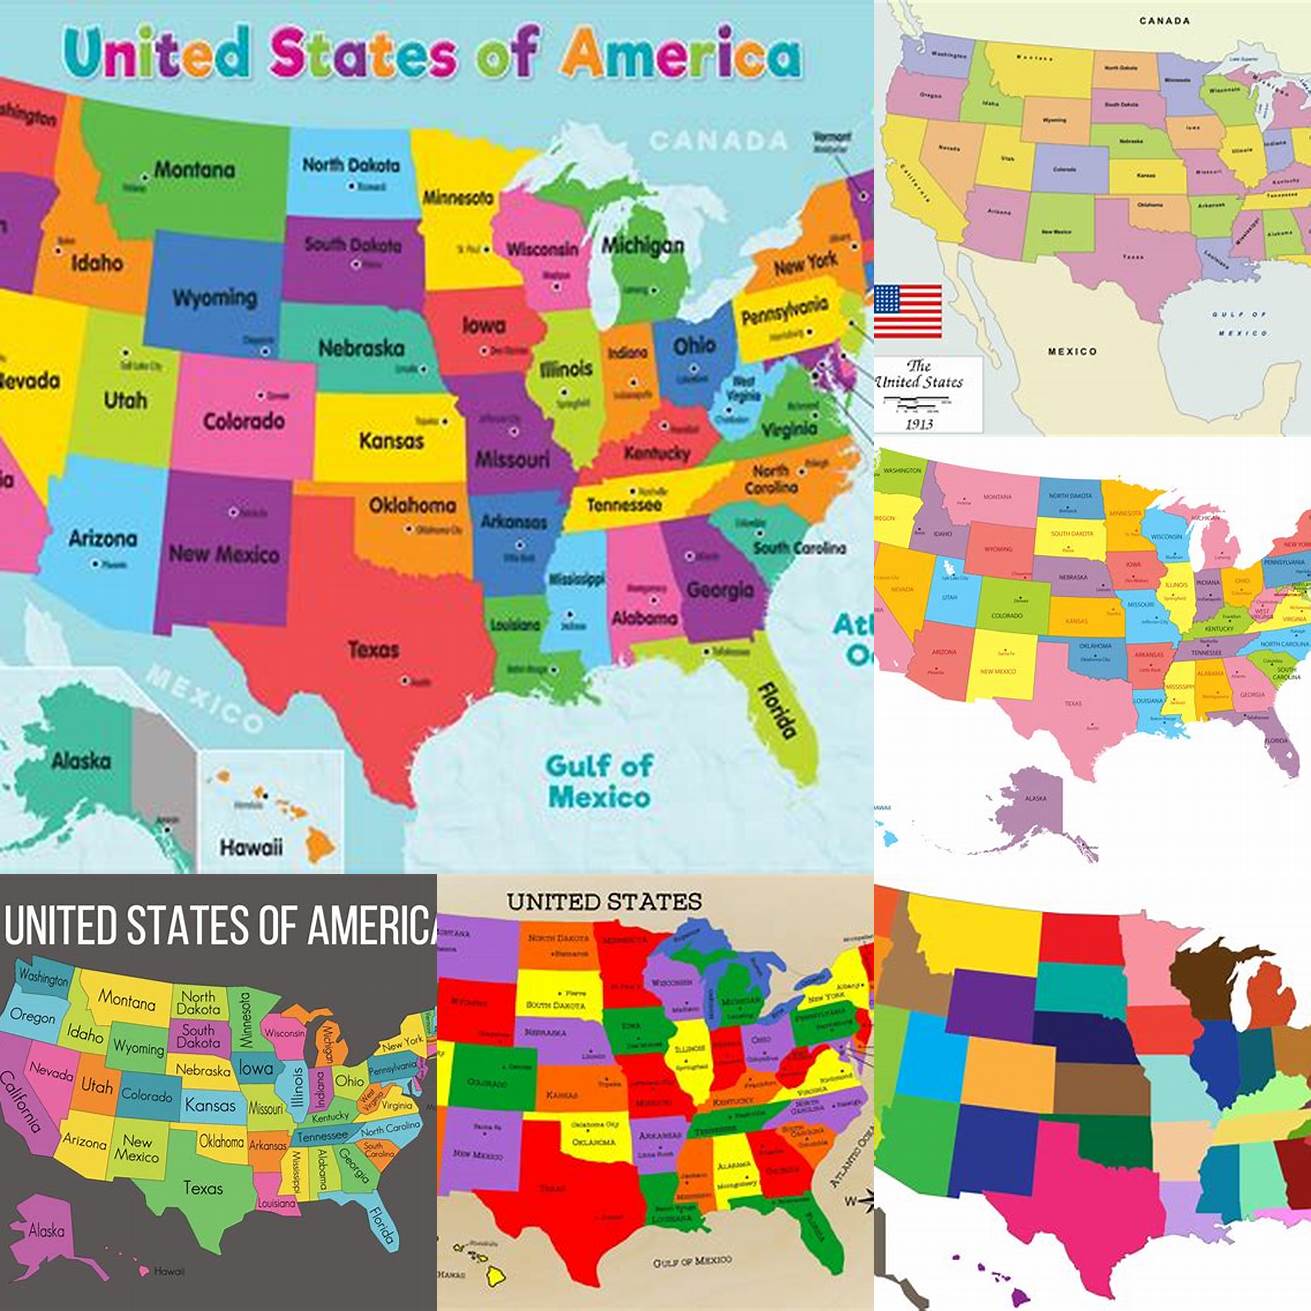 A map of the US showing the different states